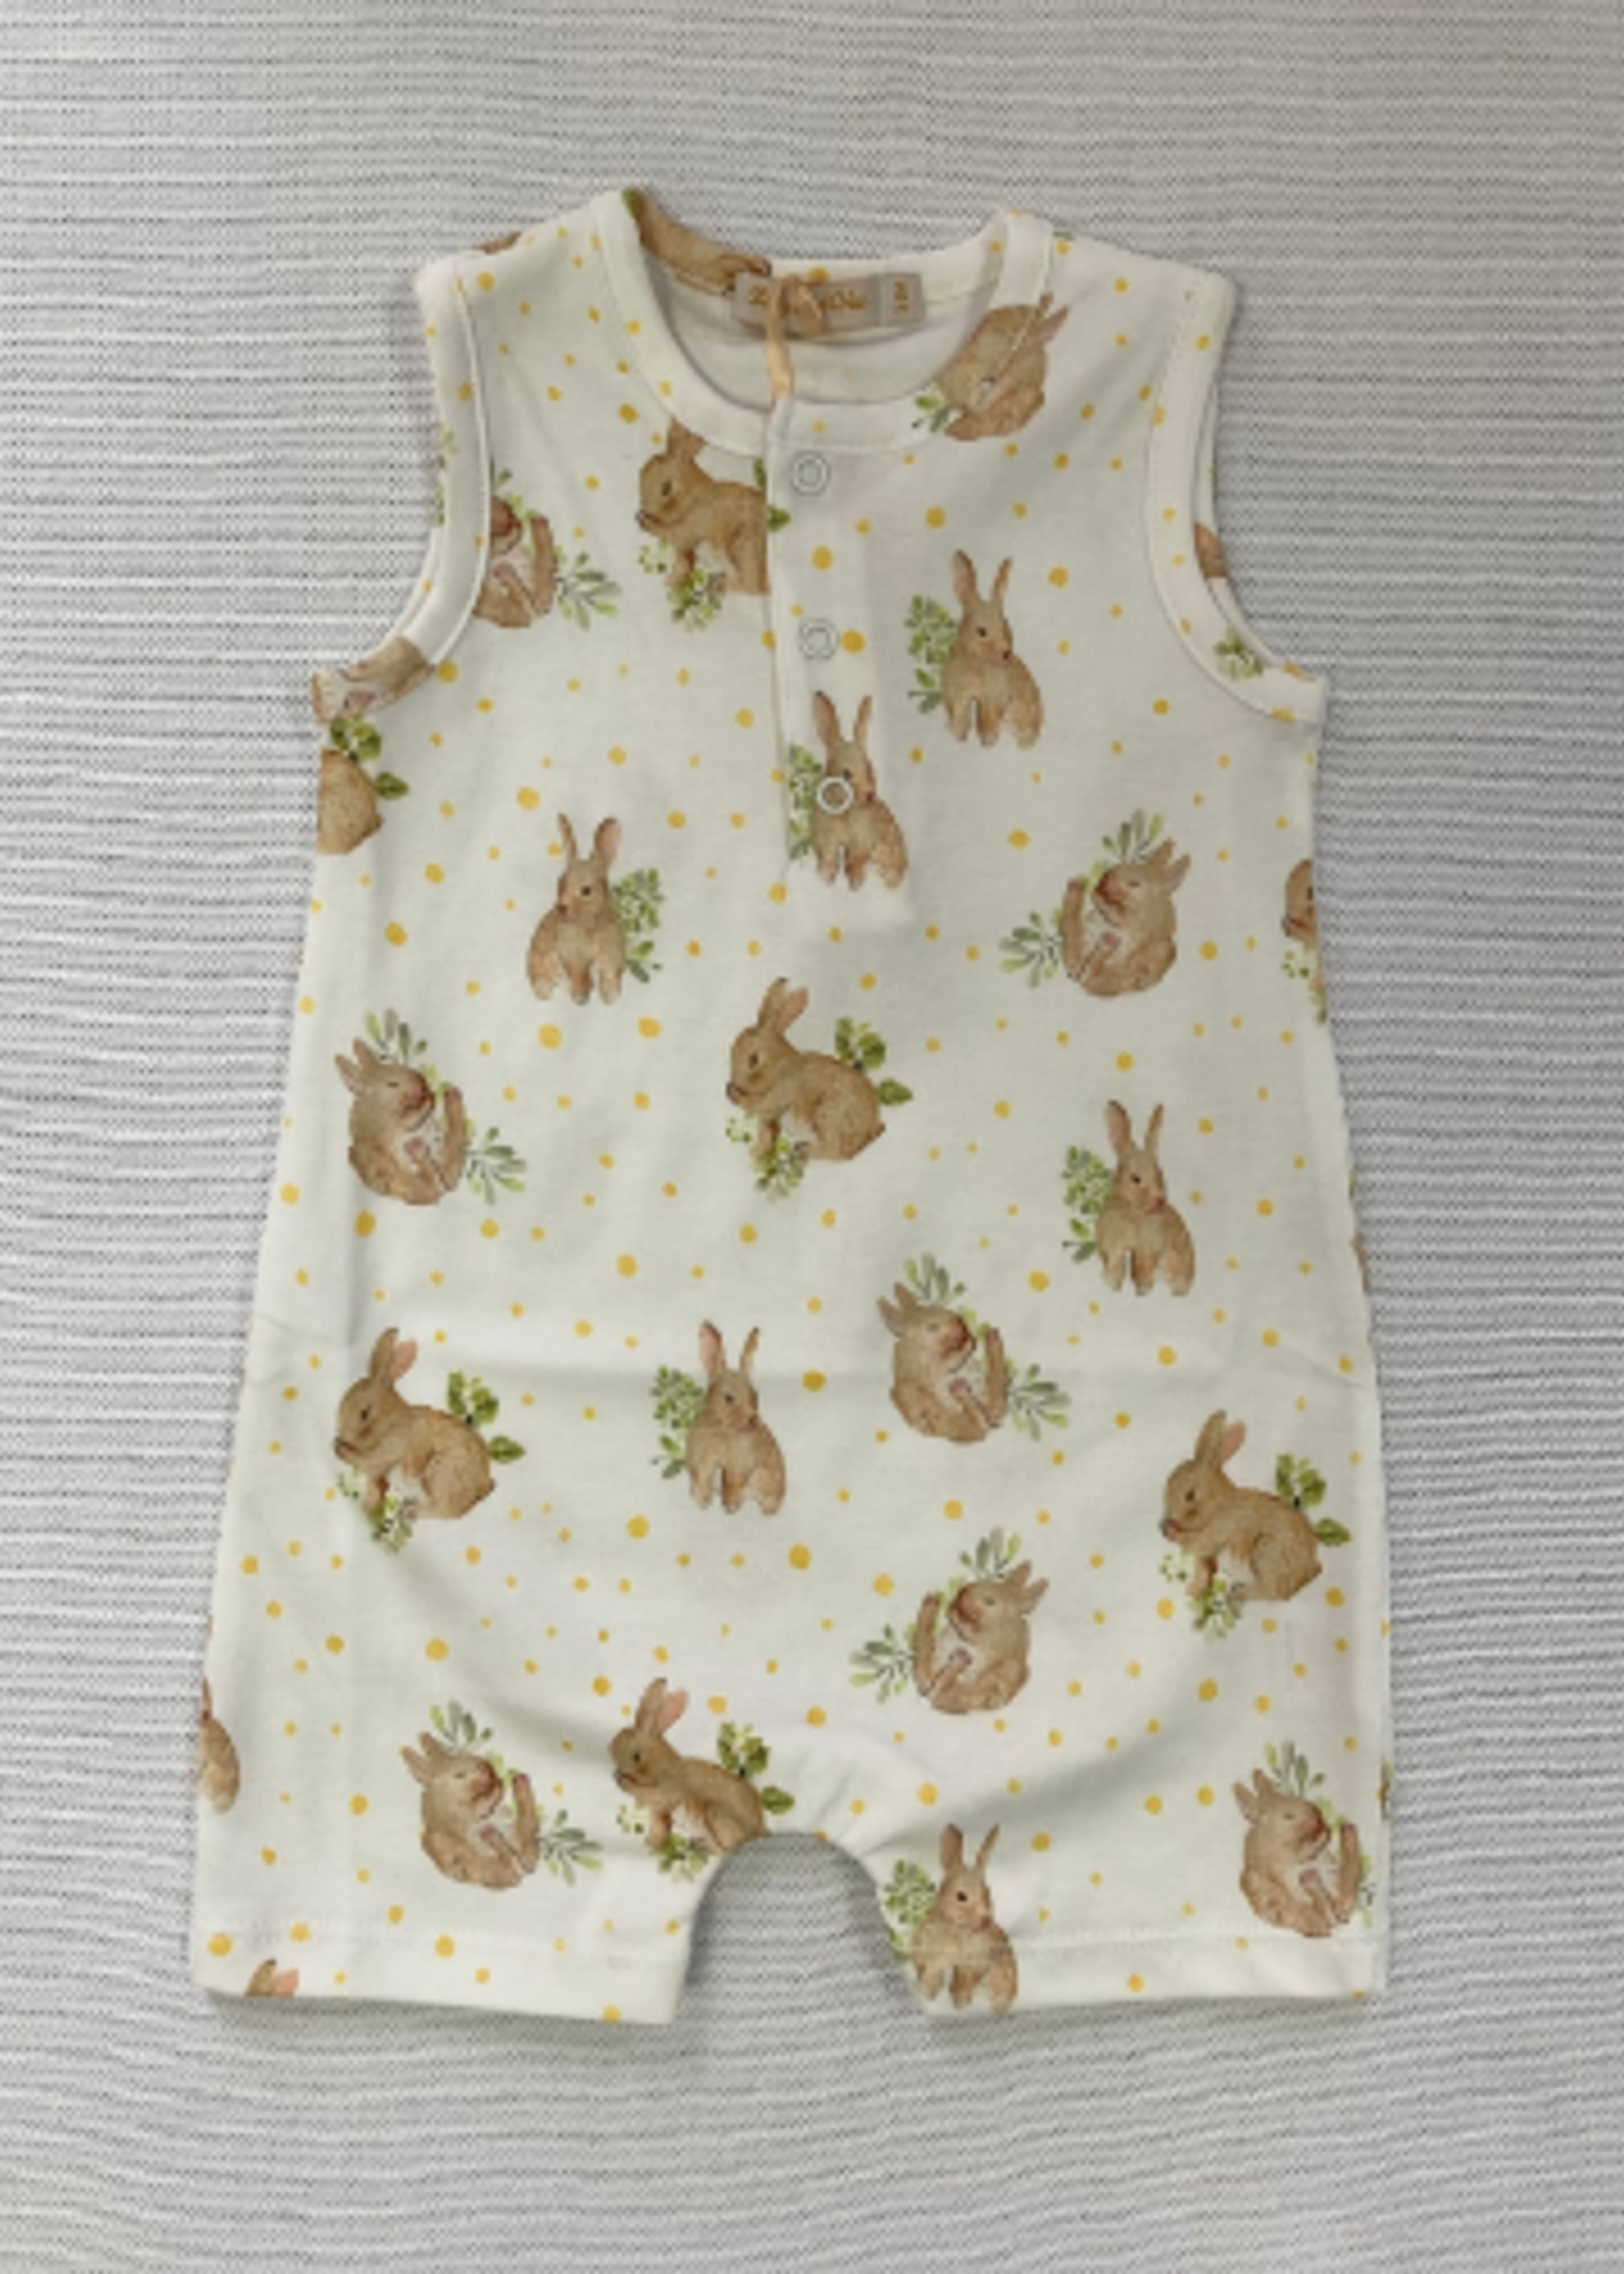 Baby Club Chic Adorable Bunnies Playsuit